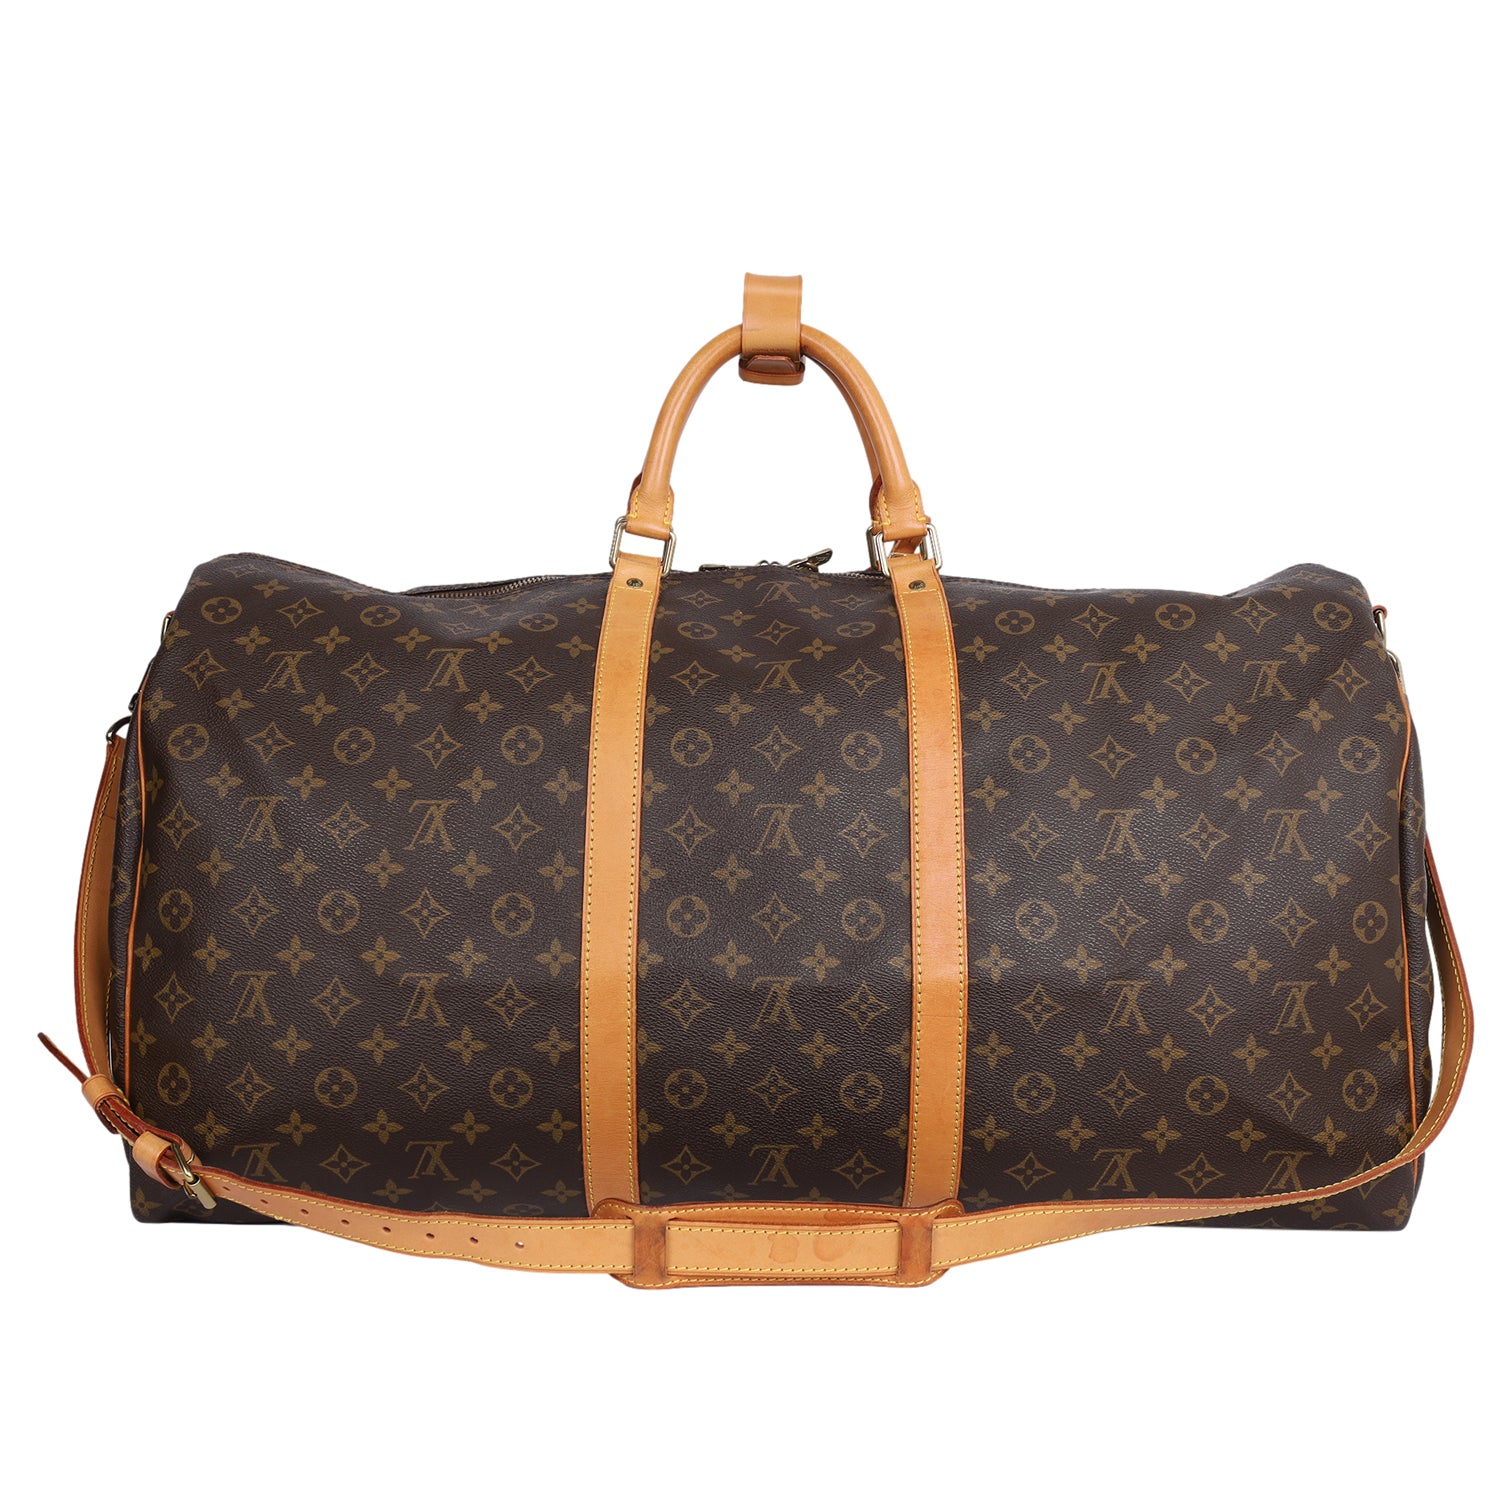 Keepall 60 Monogram Canvas Bandouliere (Authentic Pre-Owned) – The